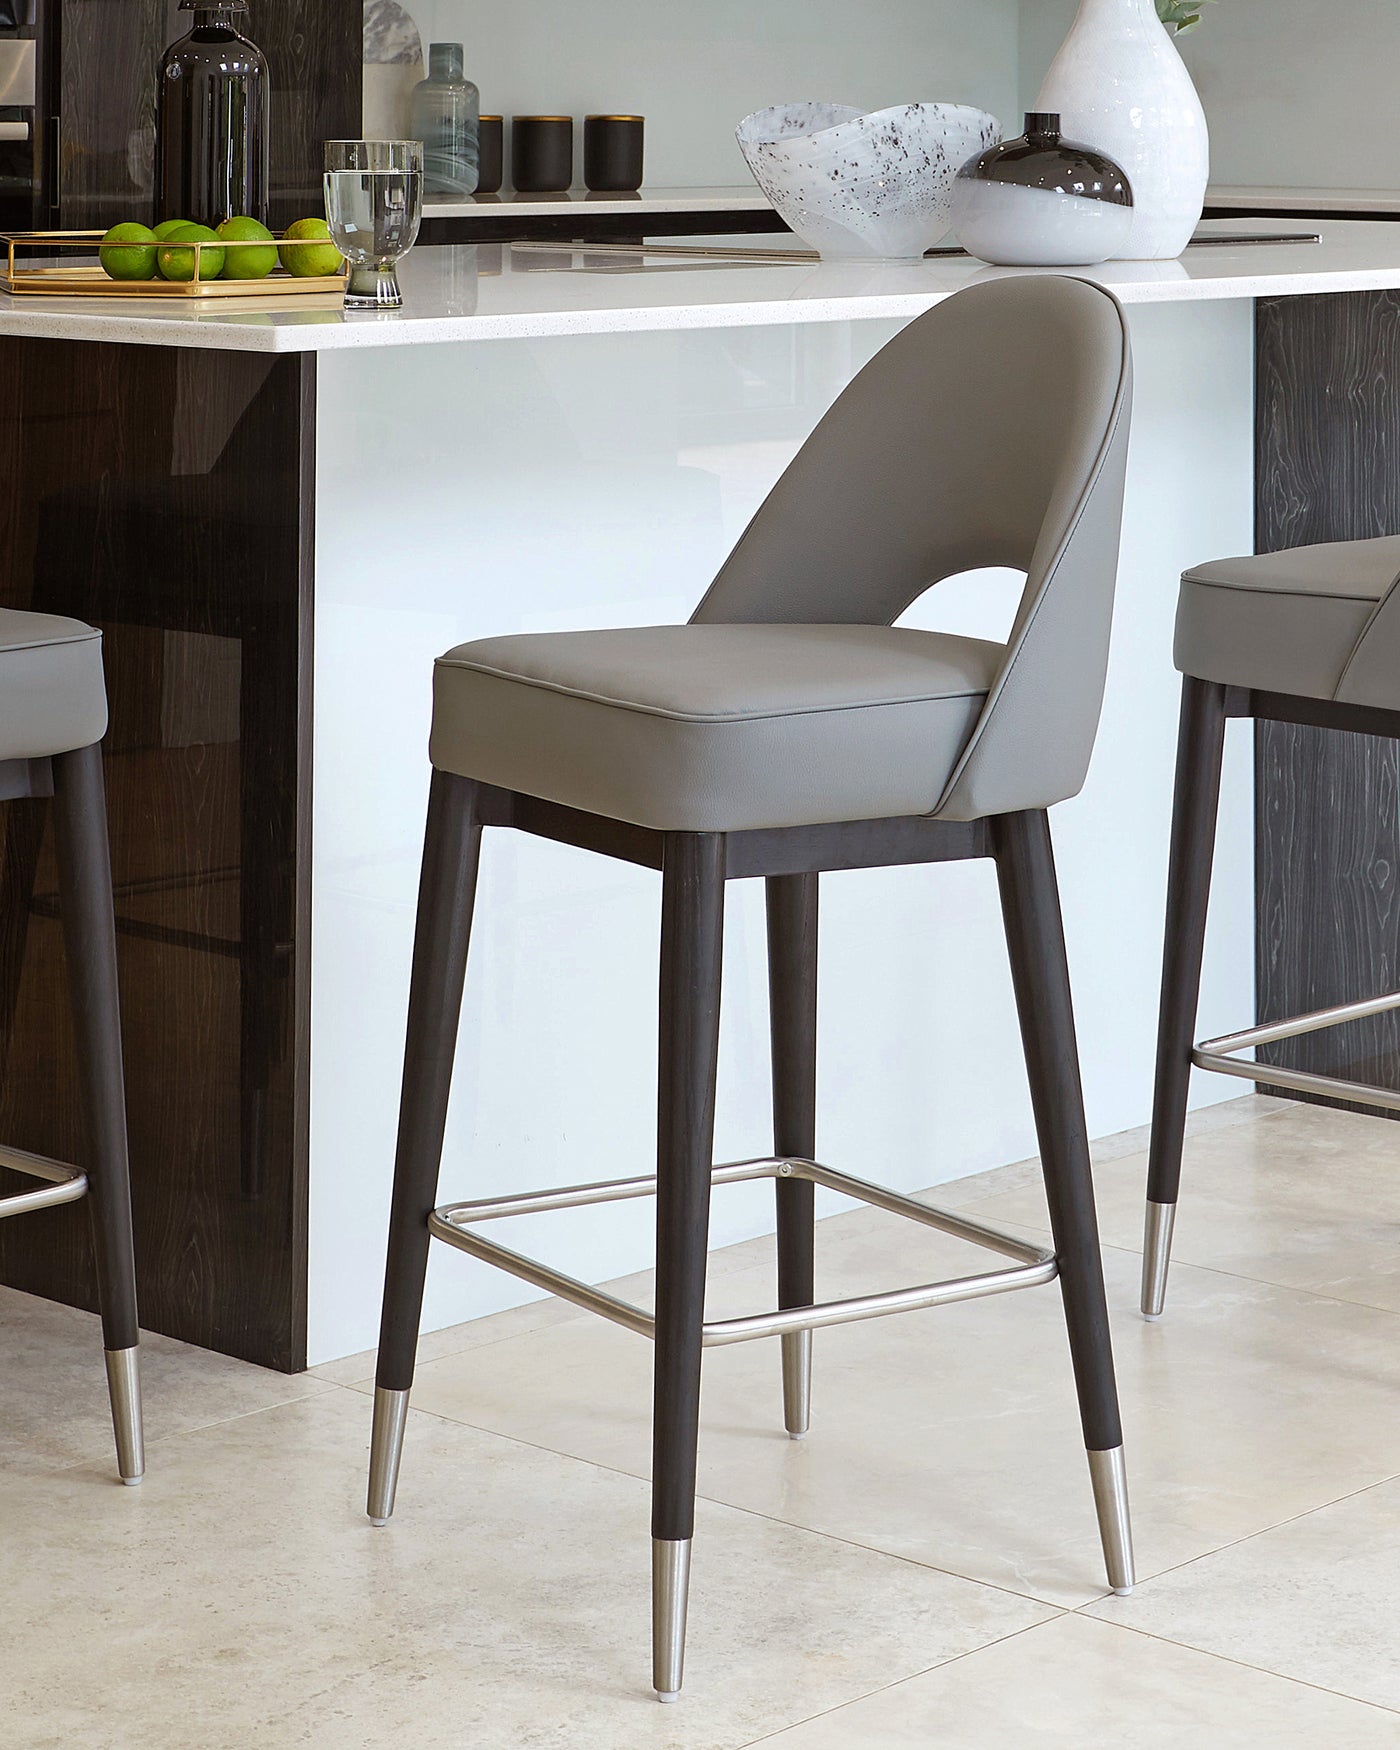 Modern bar stool with a curved leatherette seat in a muted grey tone, featuring slender black legs tipped with metallic accents and a circular footrest.